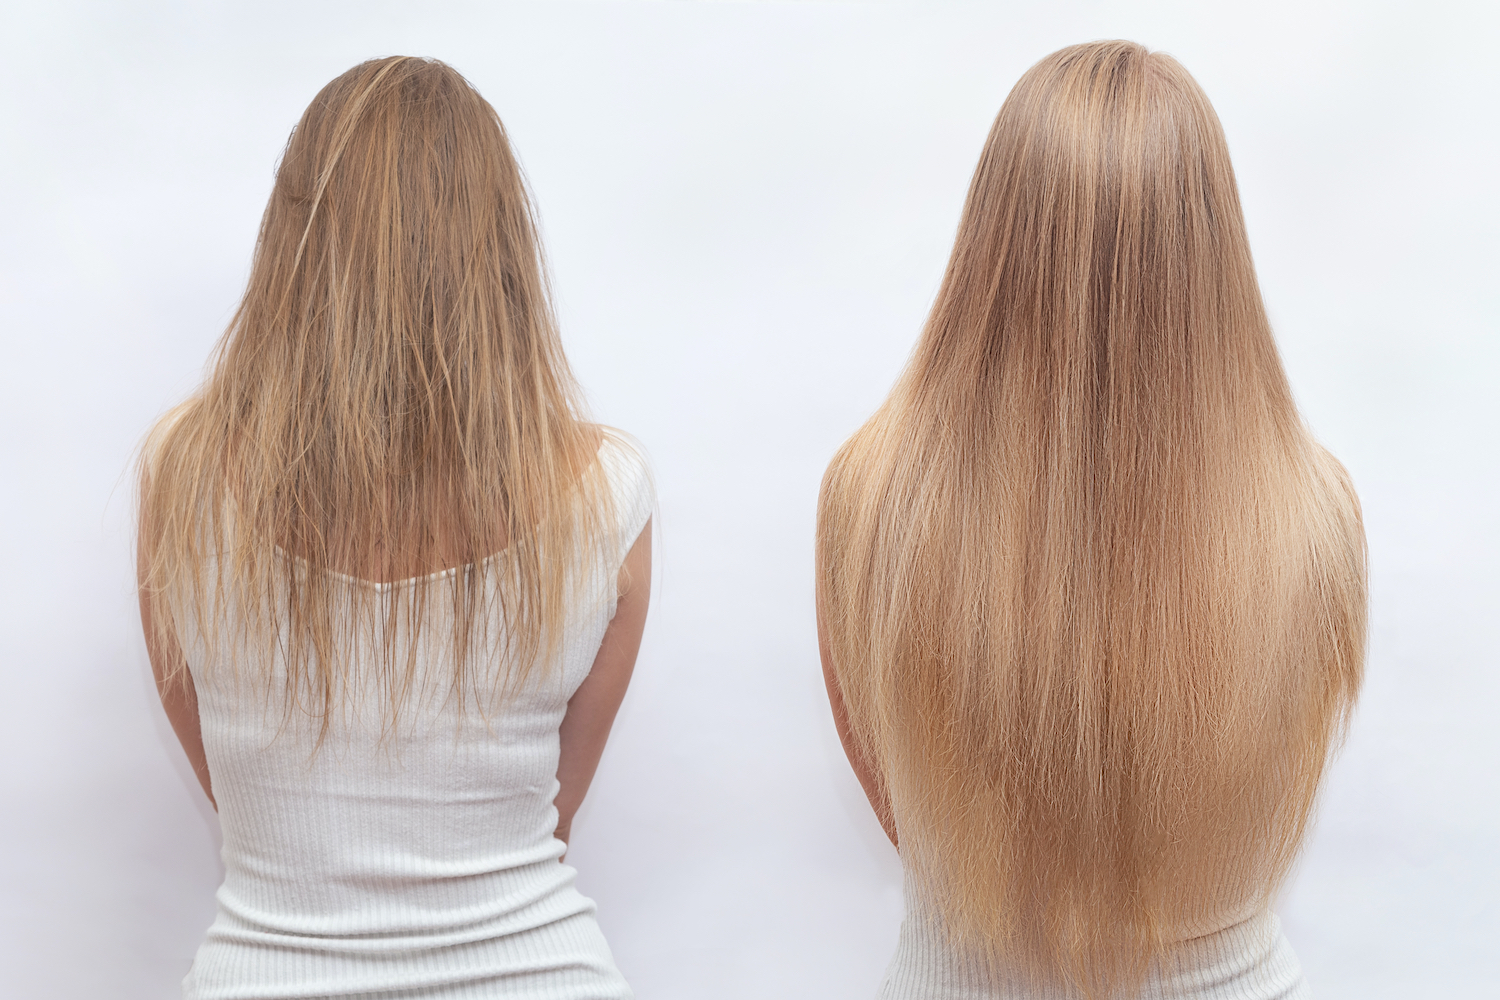 Hair Extensions: What You Need to Know